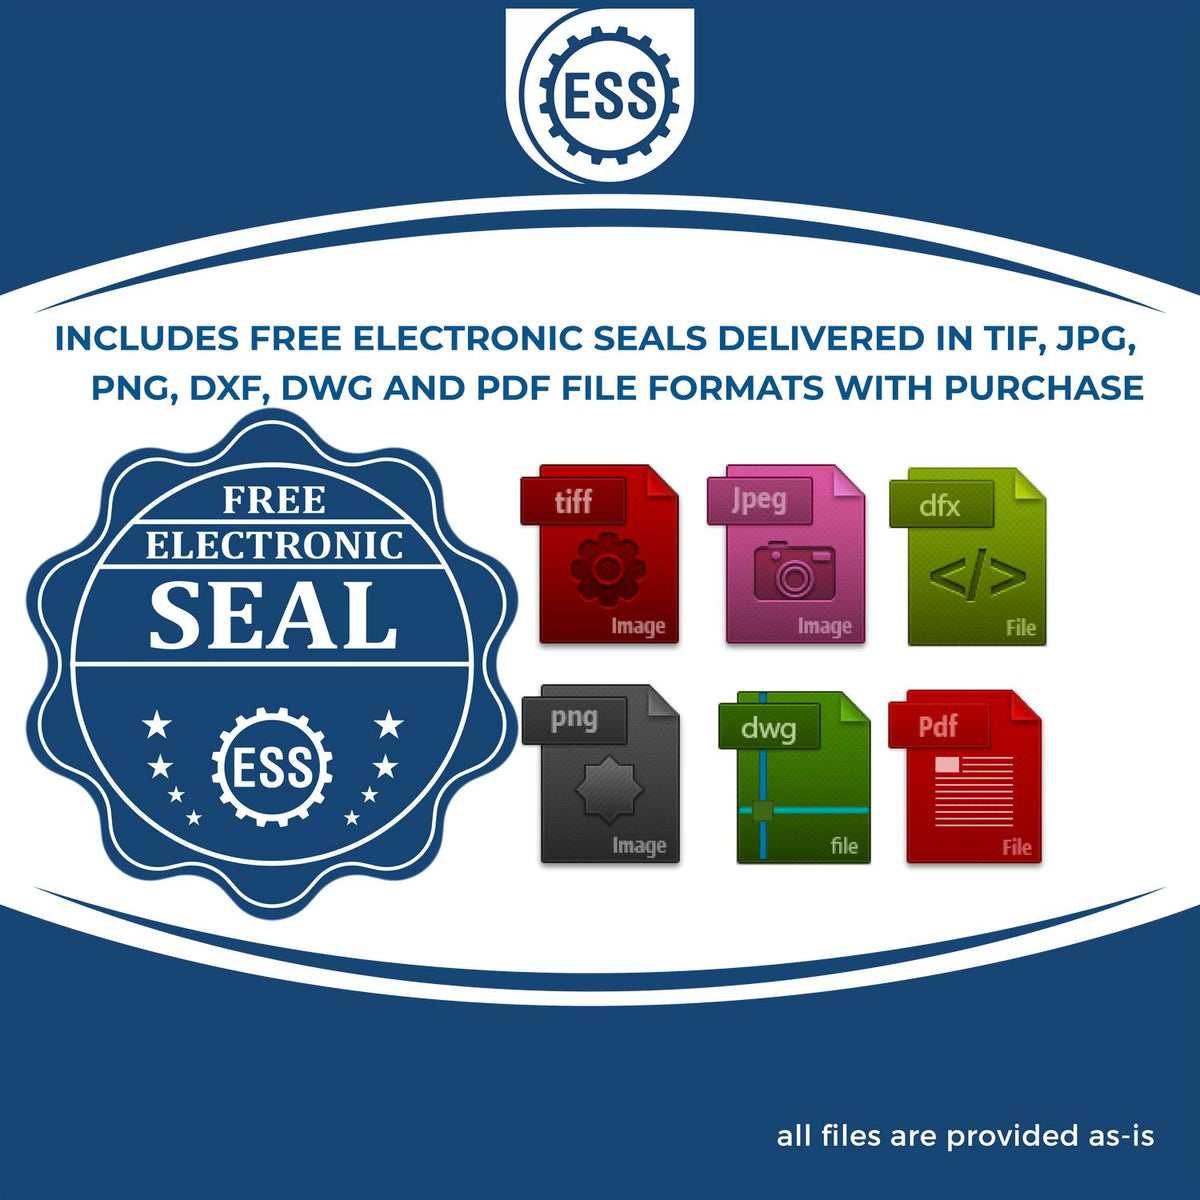 An infographic for the free electronic seal for the Soft Pocket Missouri Landscape Architect Embosser illustrating the different file type icons such as DXF, DWG, TIF, JPG and PNG.